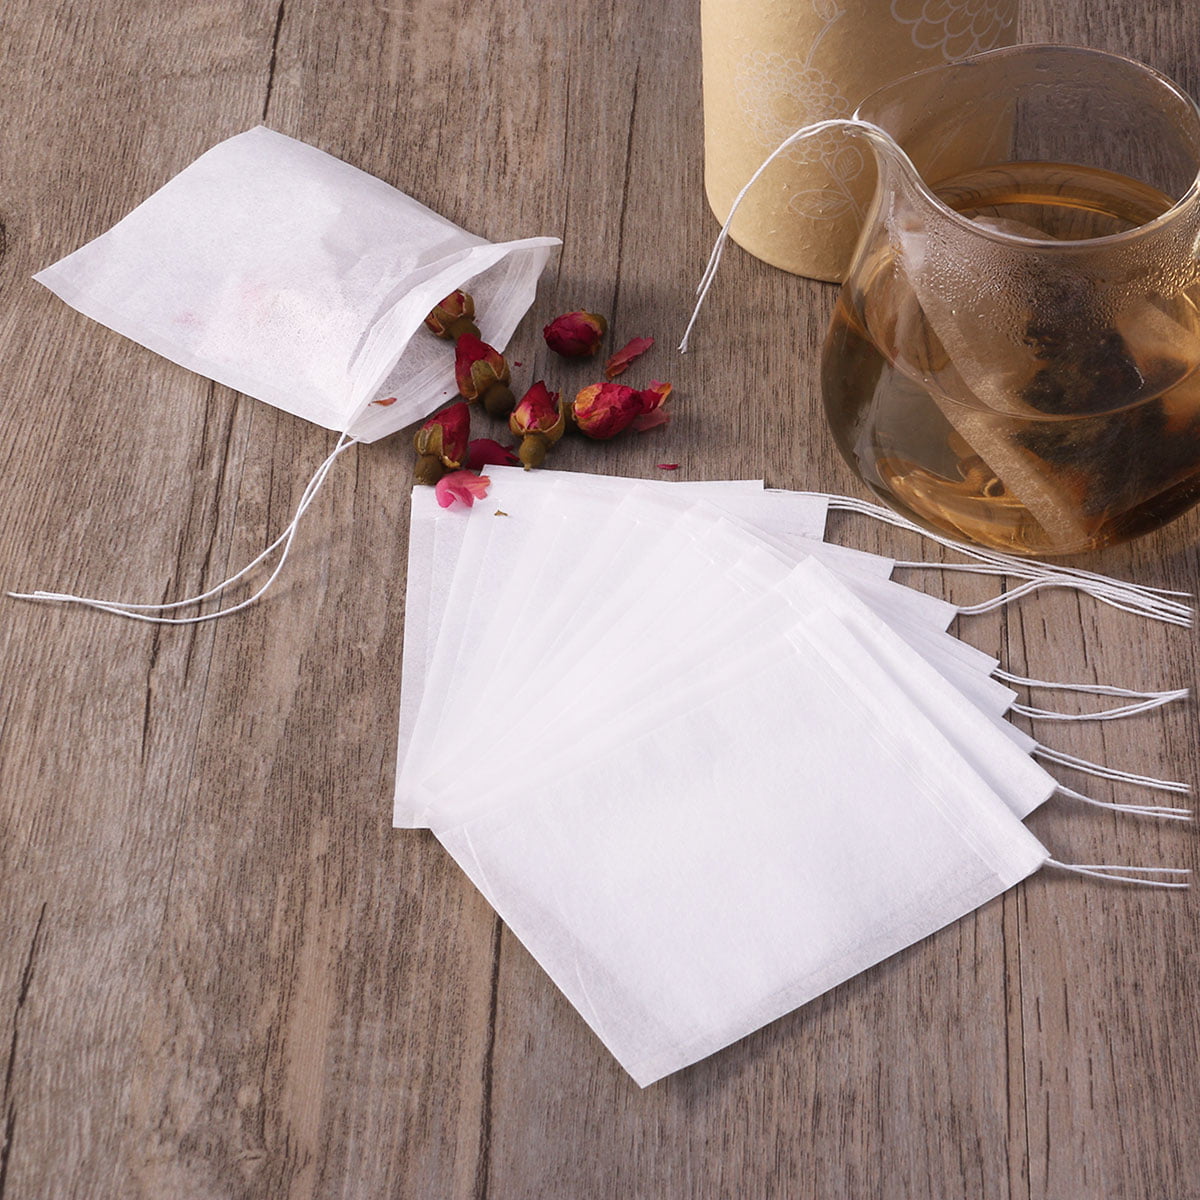 100PCS NON-WOVEN EMPTY LOOSE TEA BAGS DRAWSTRING FILTER COFFEE HERBS TEABAGS D1